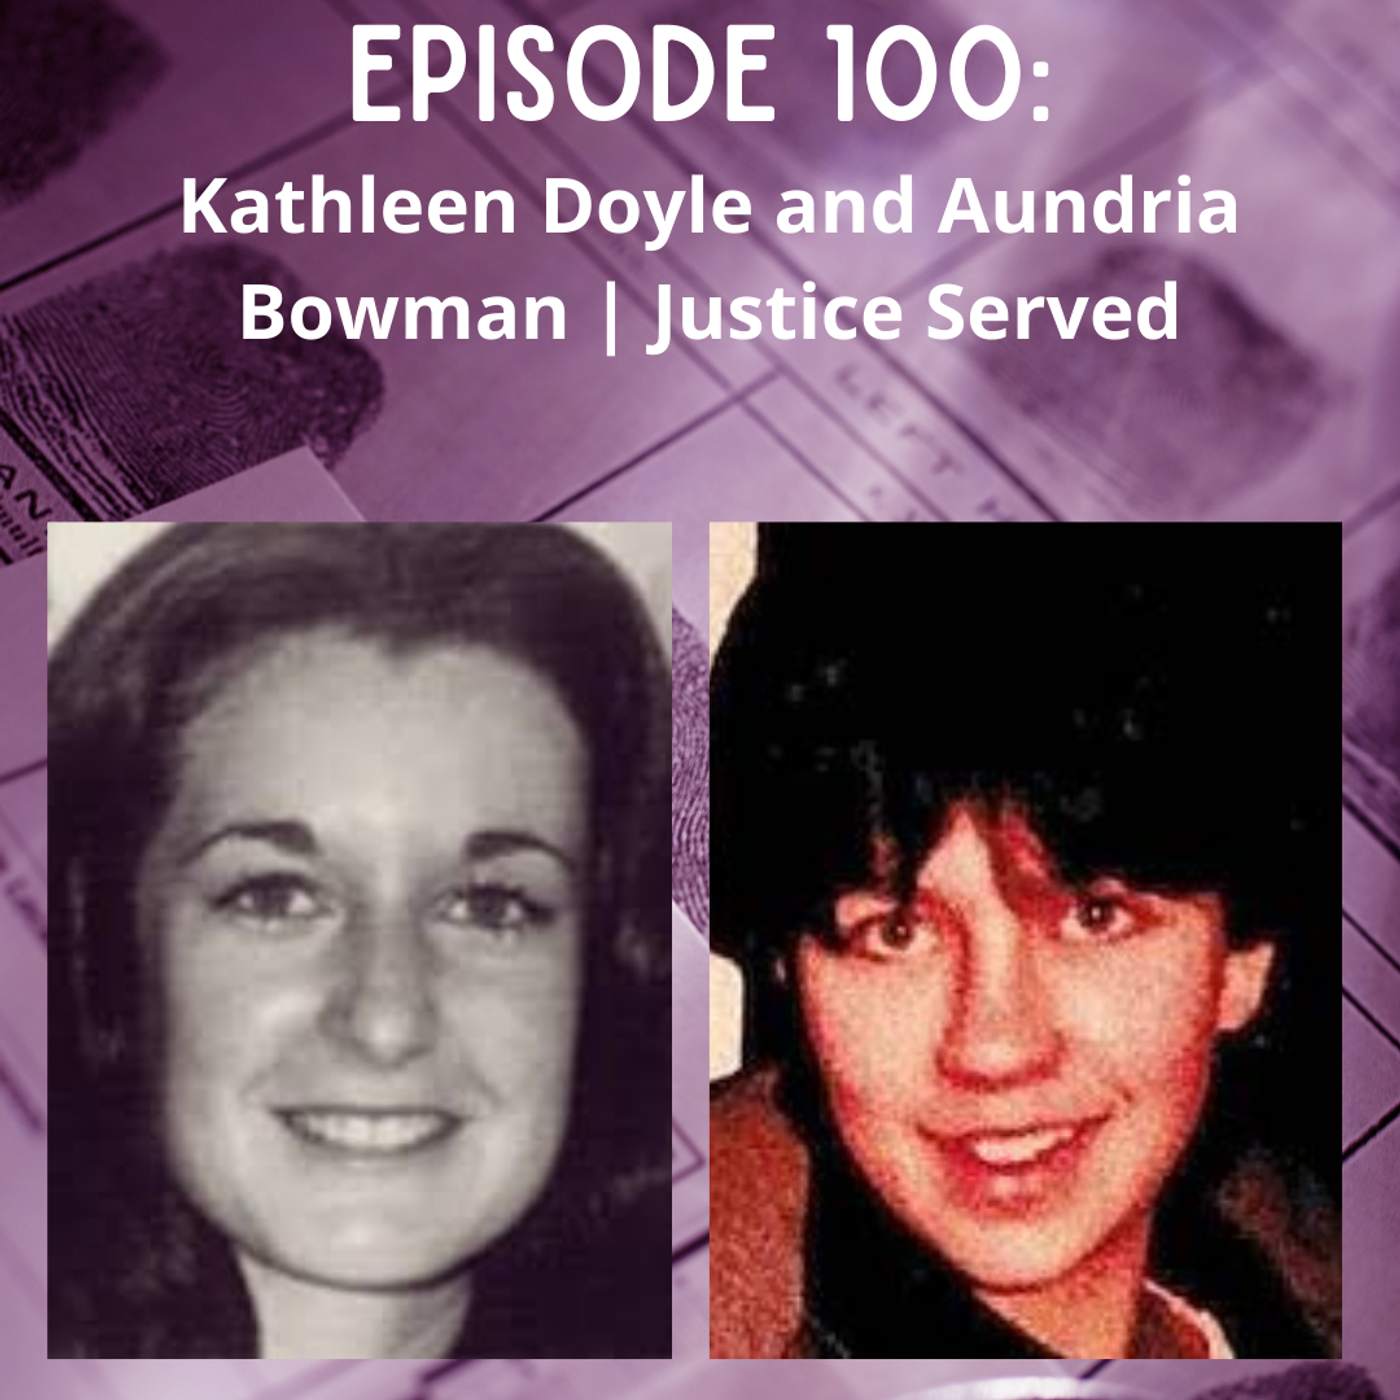 Episode 100: Kathleen Doyle and Aundria Bowman | Justice Served